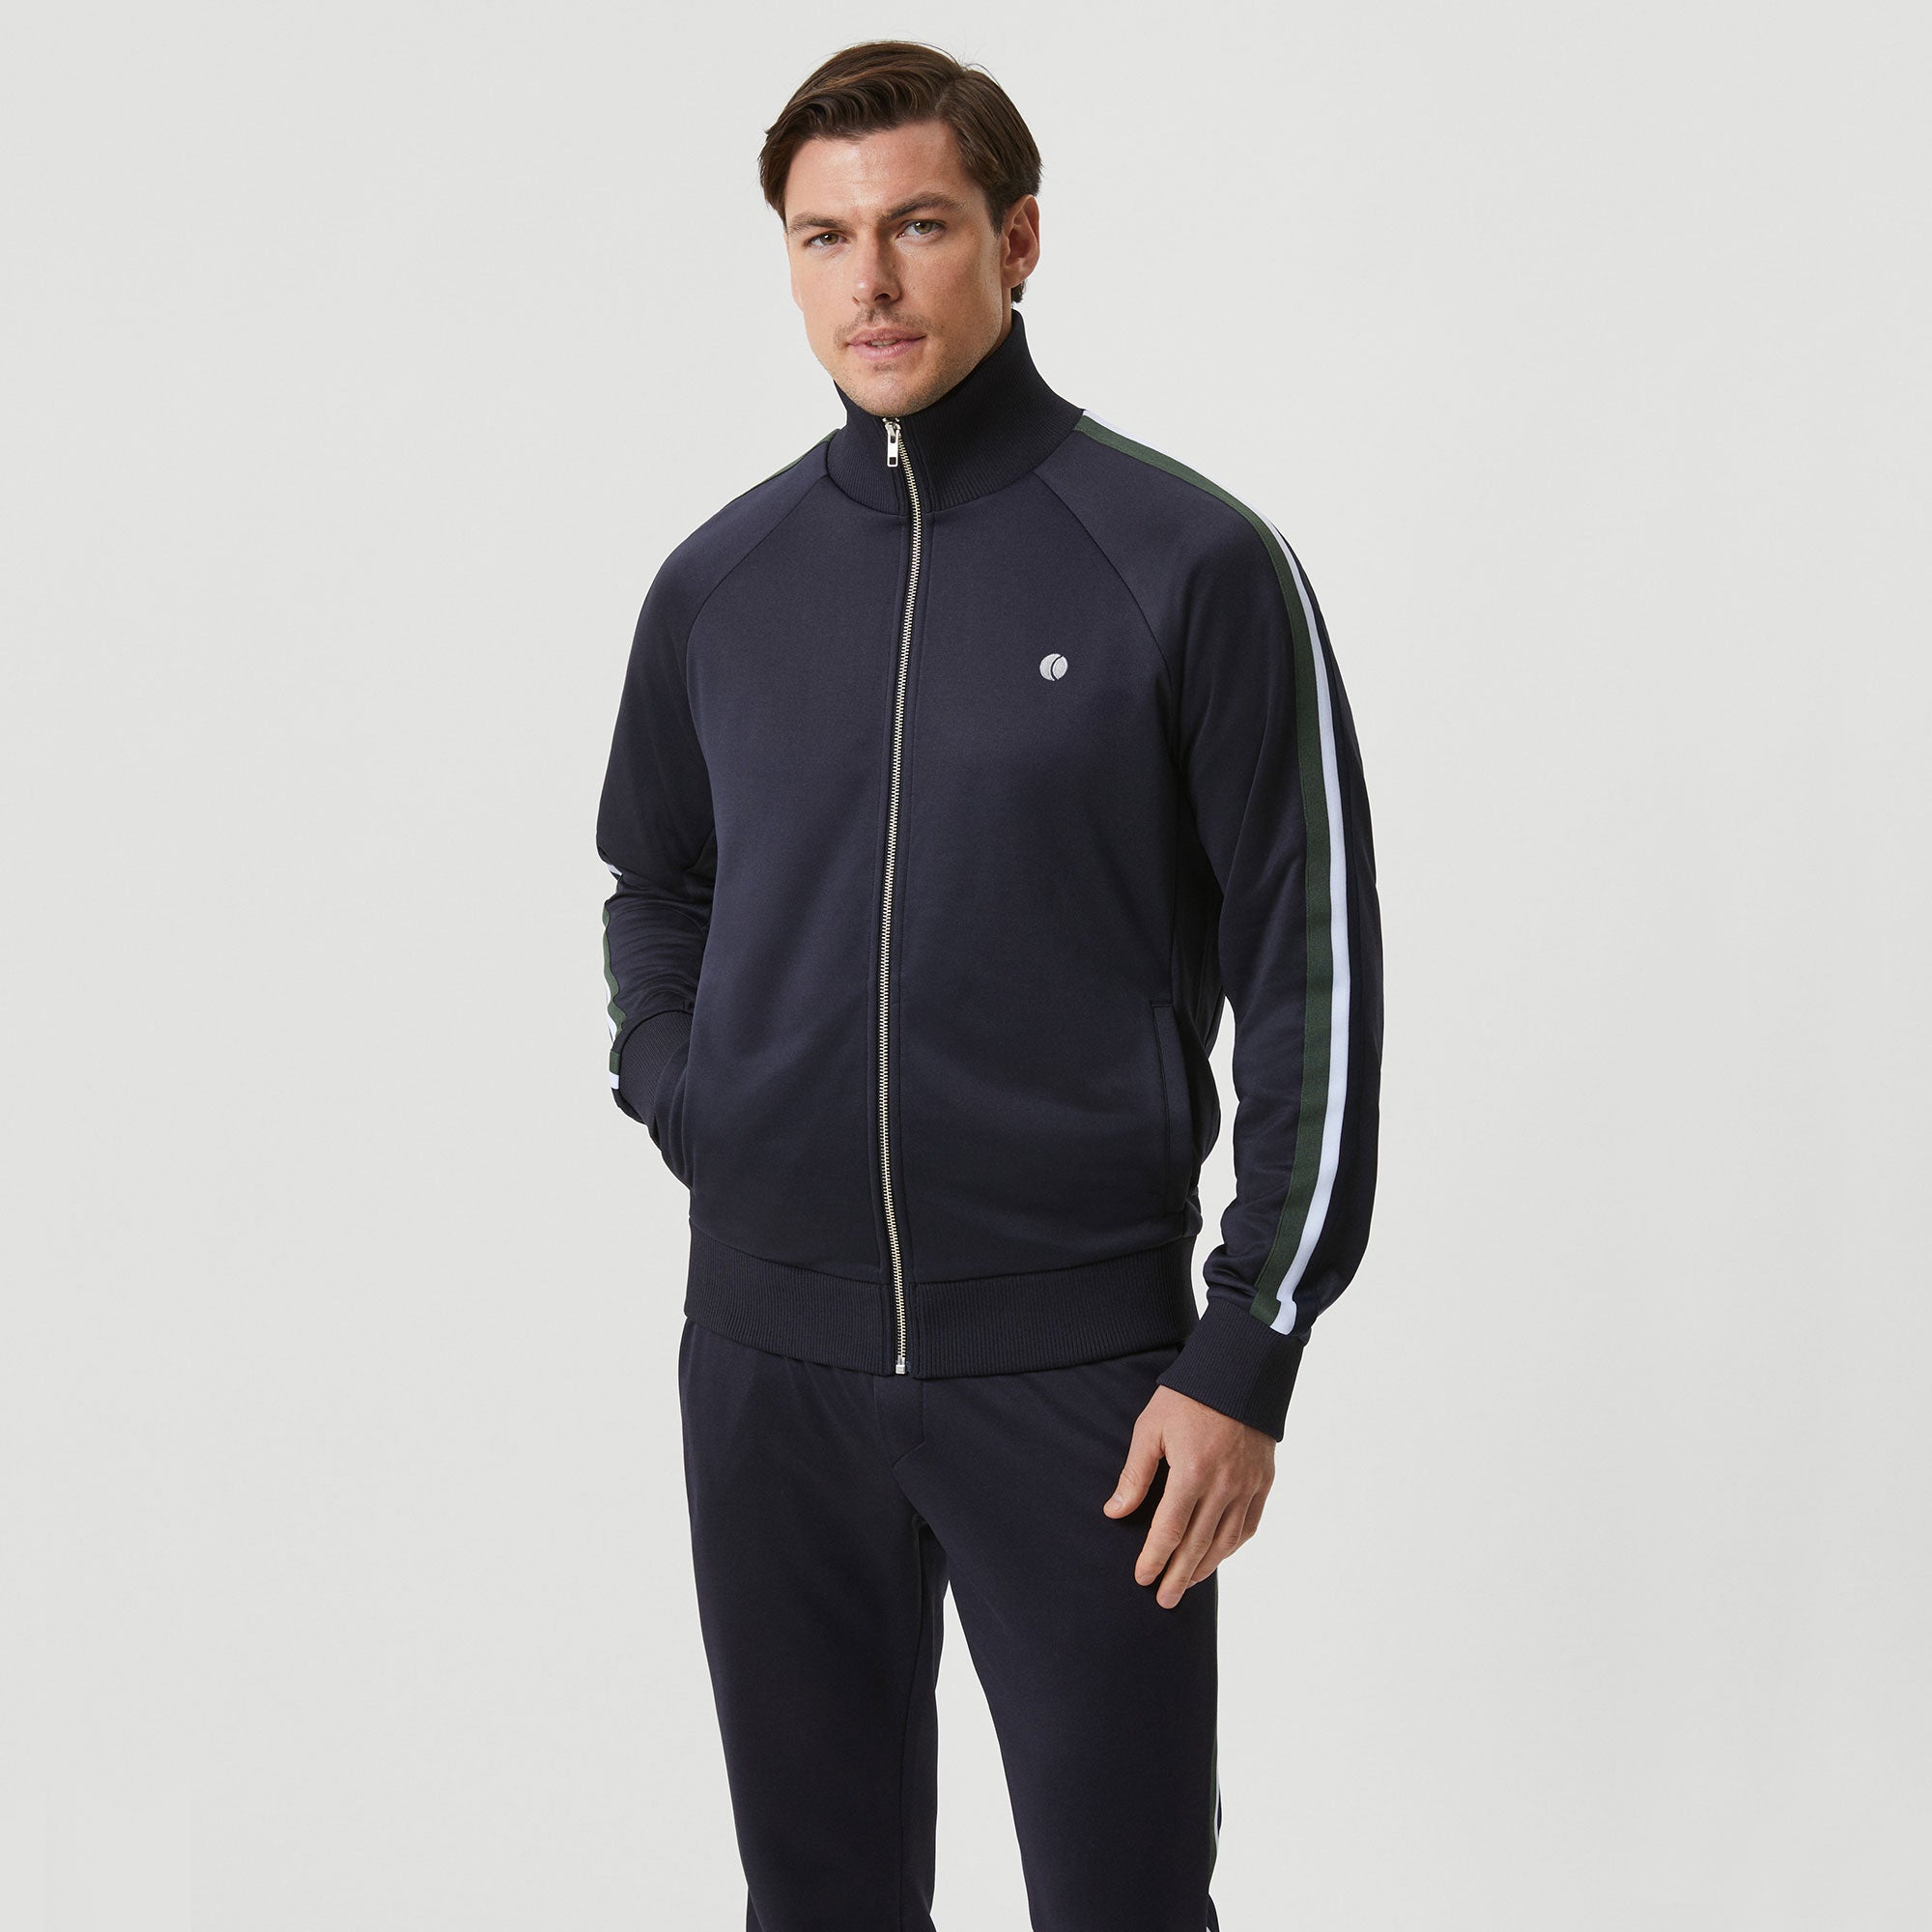 Björn Borg Ace Men's Outfit 6 | Tennis Only